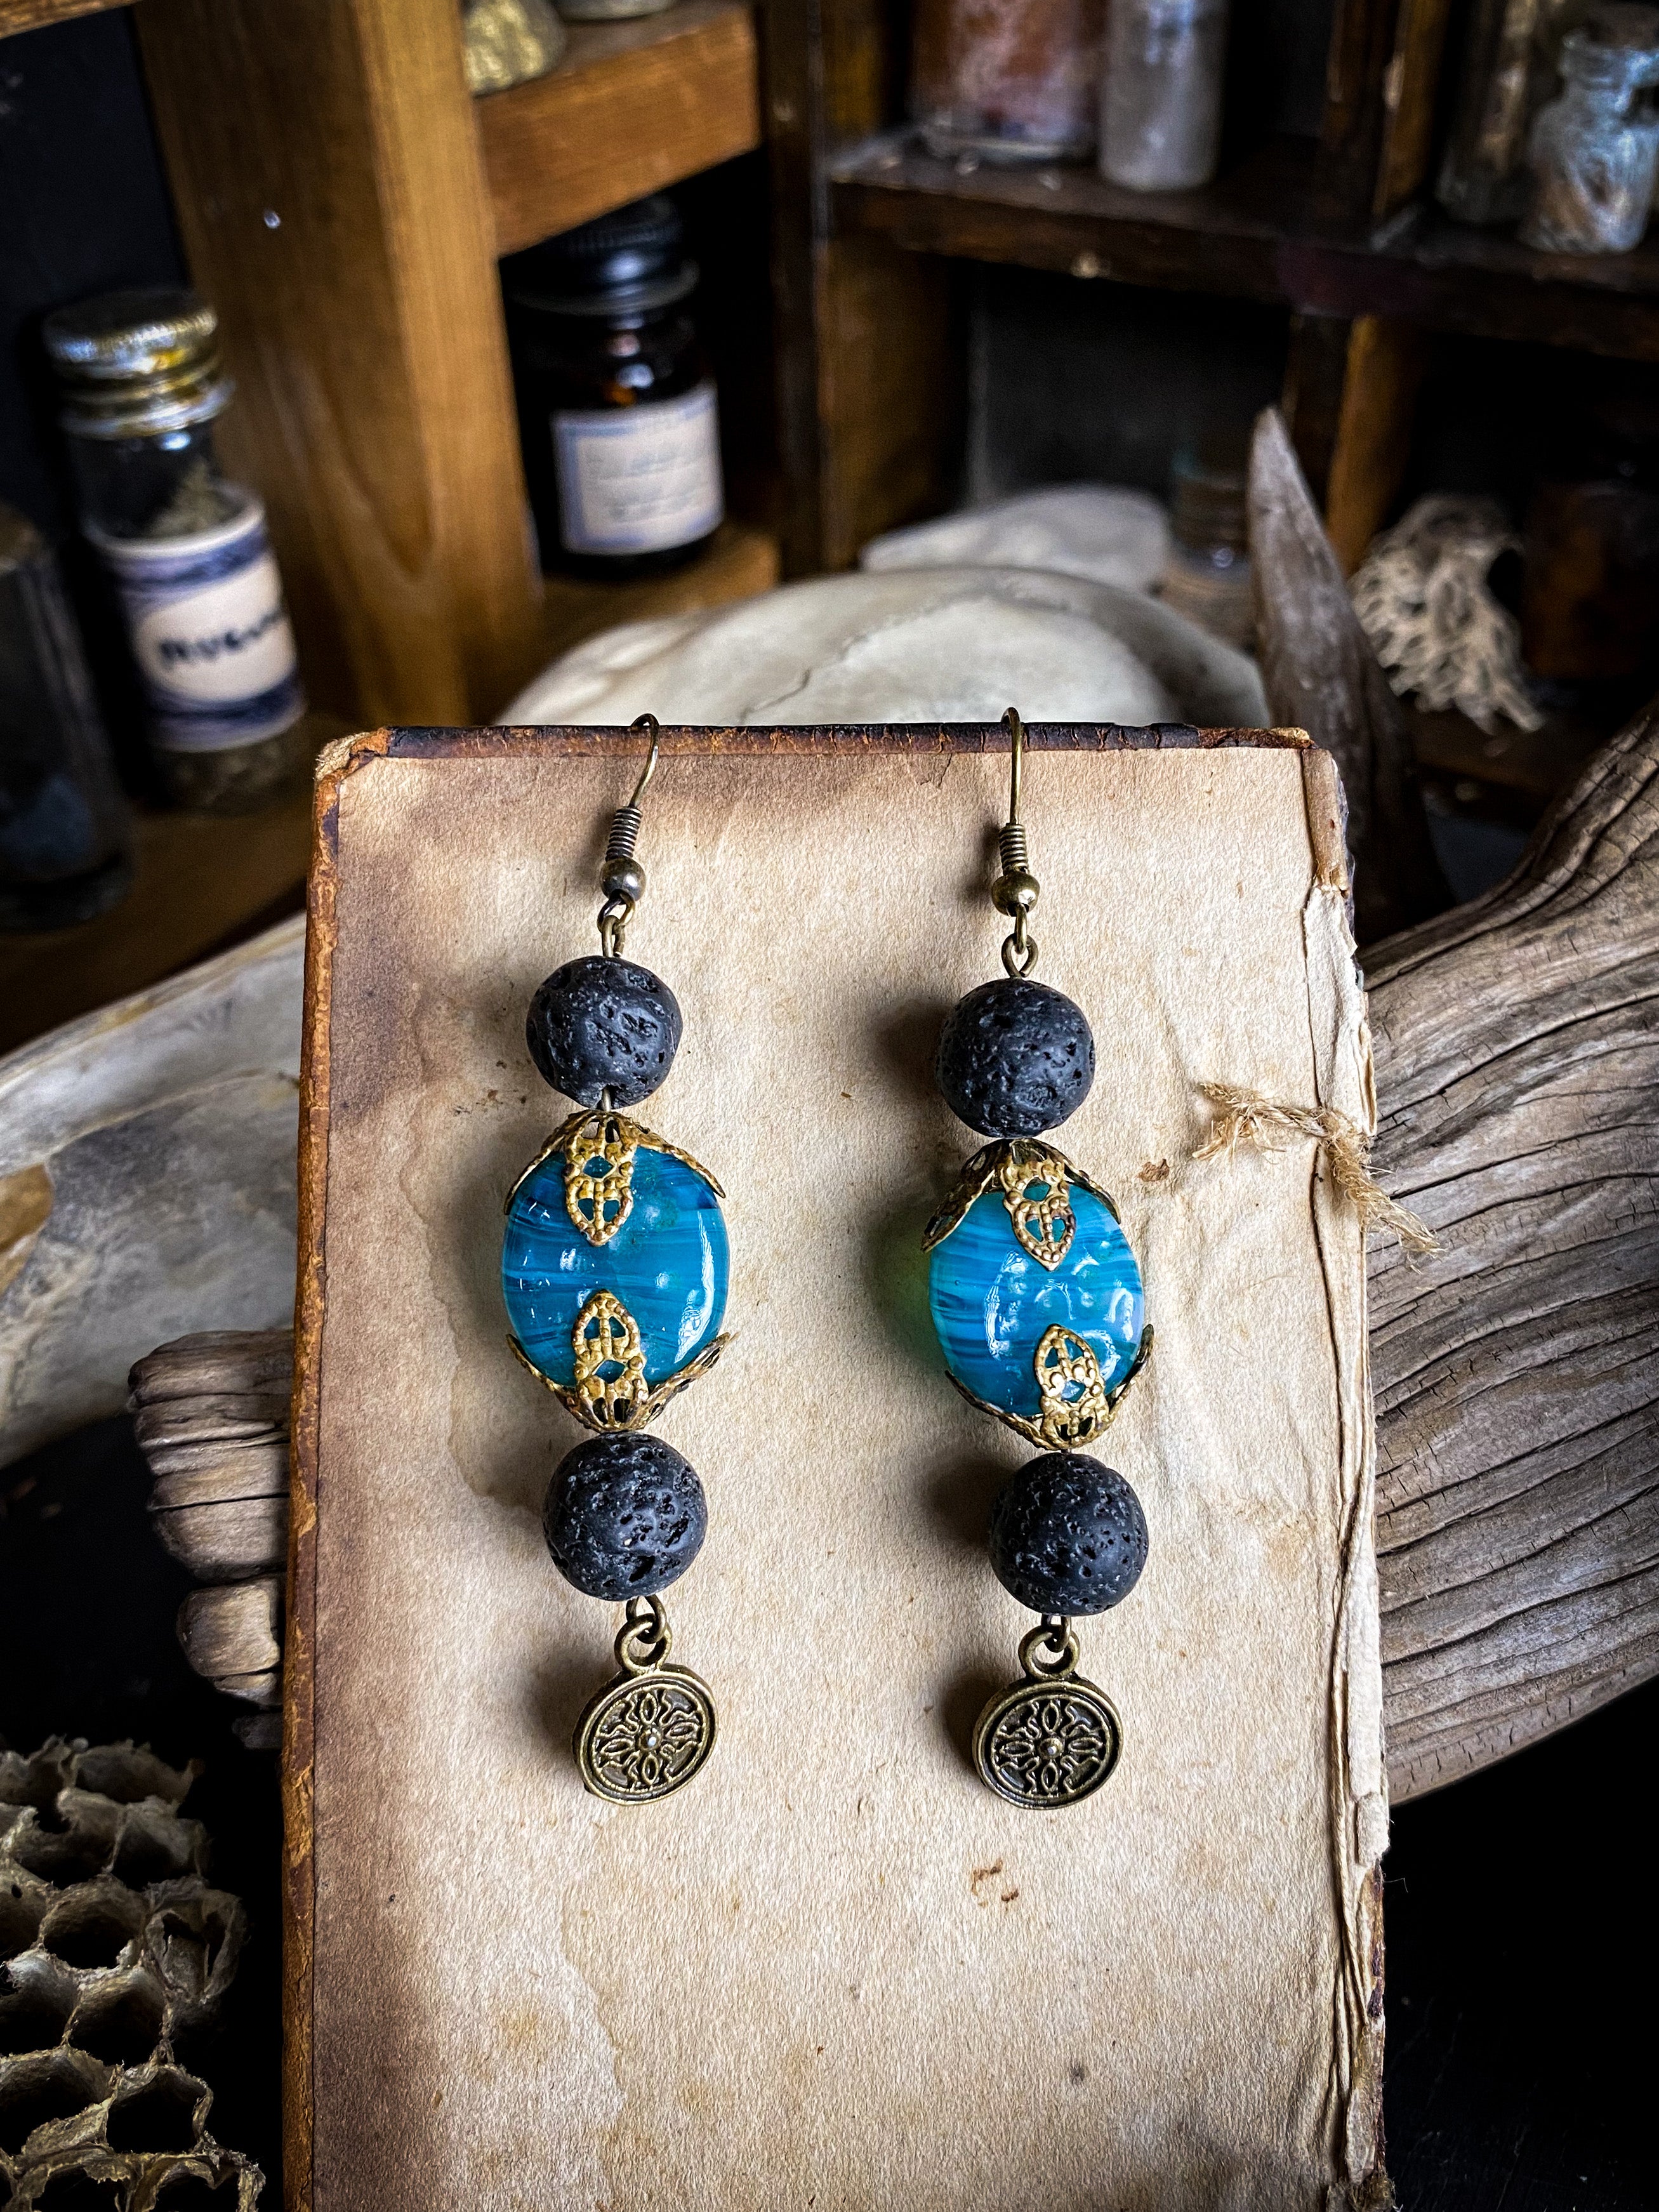 Fire + Water - Hand Crafted Earrings